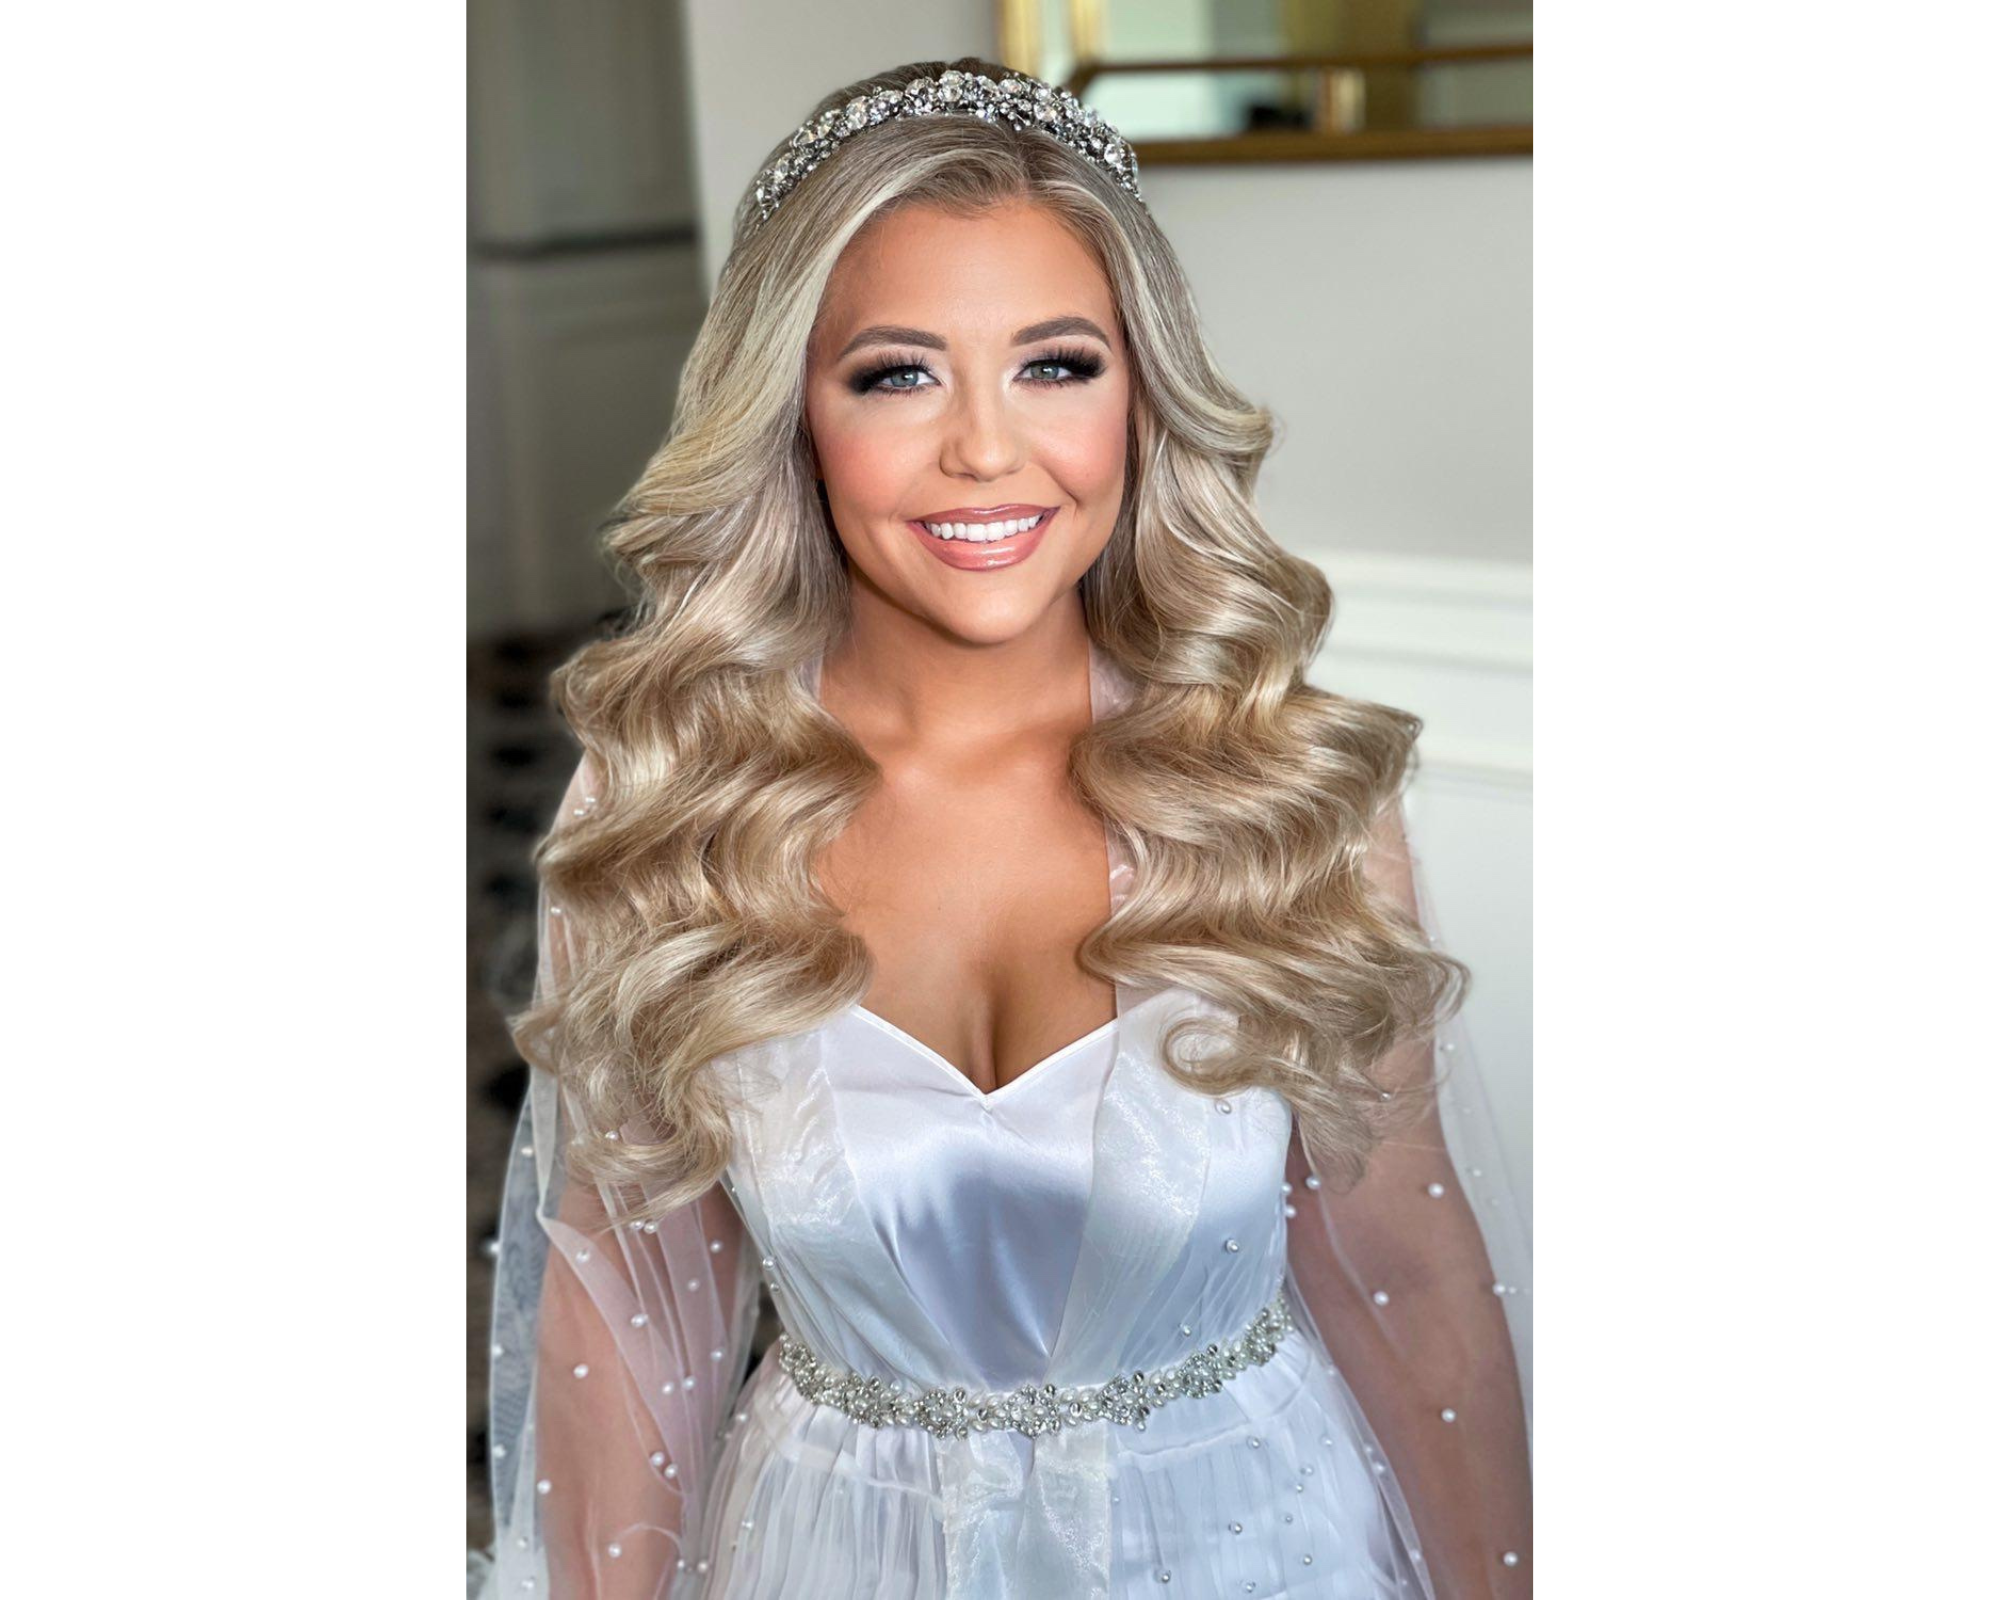 Our beautiful bride Sabrina wearing her long blond hair in Hollywood waves and her Swarovski crystal bridal headband